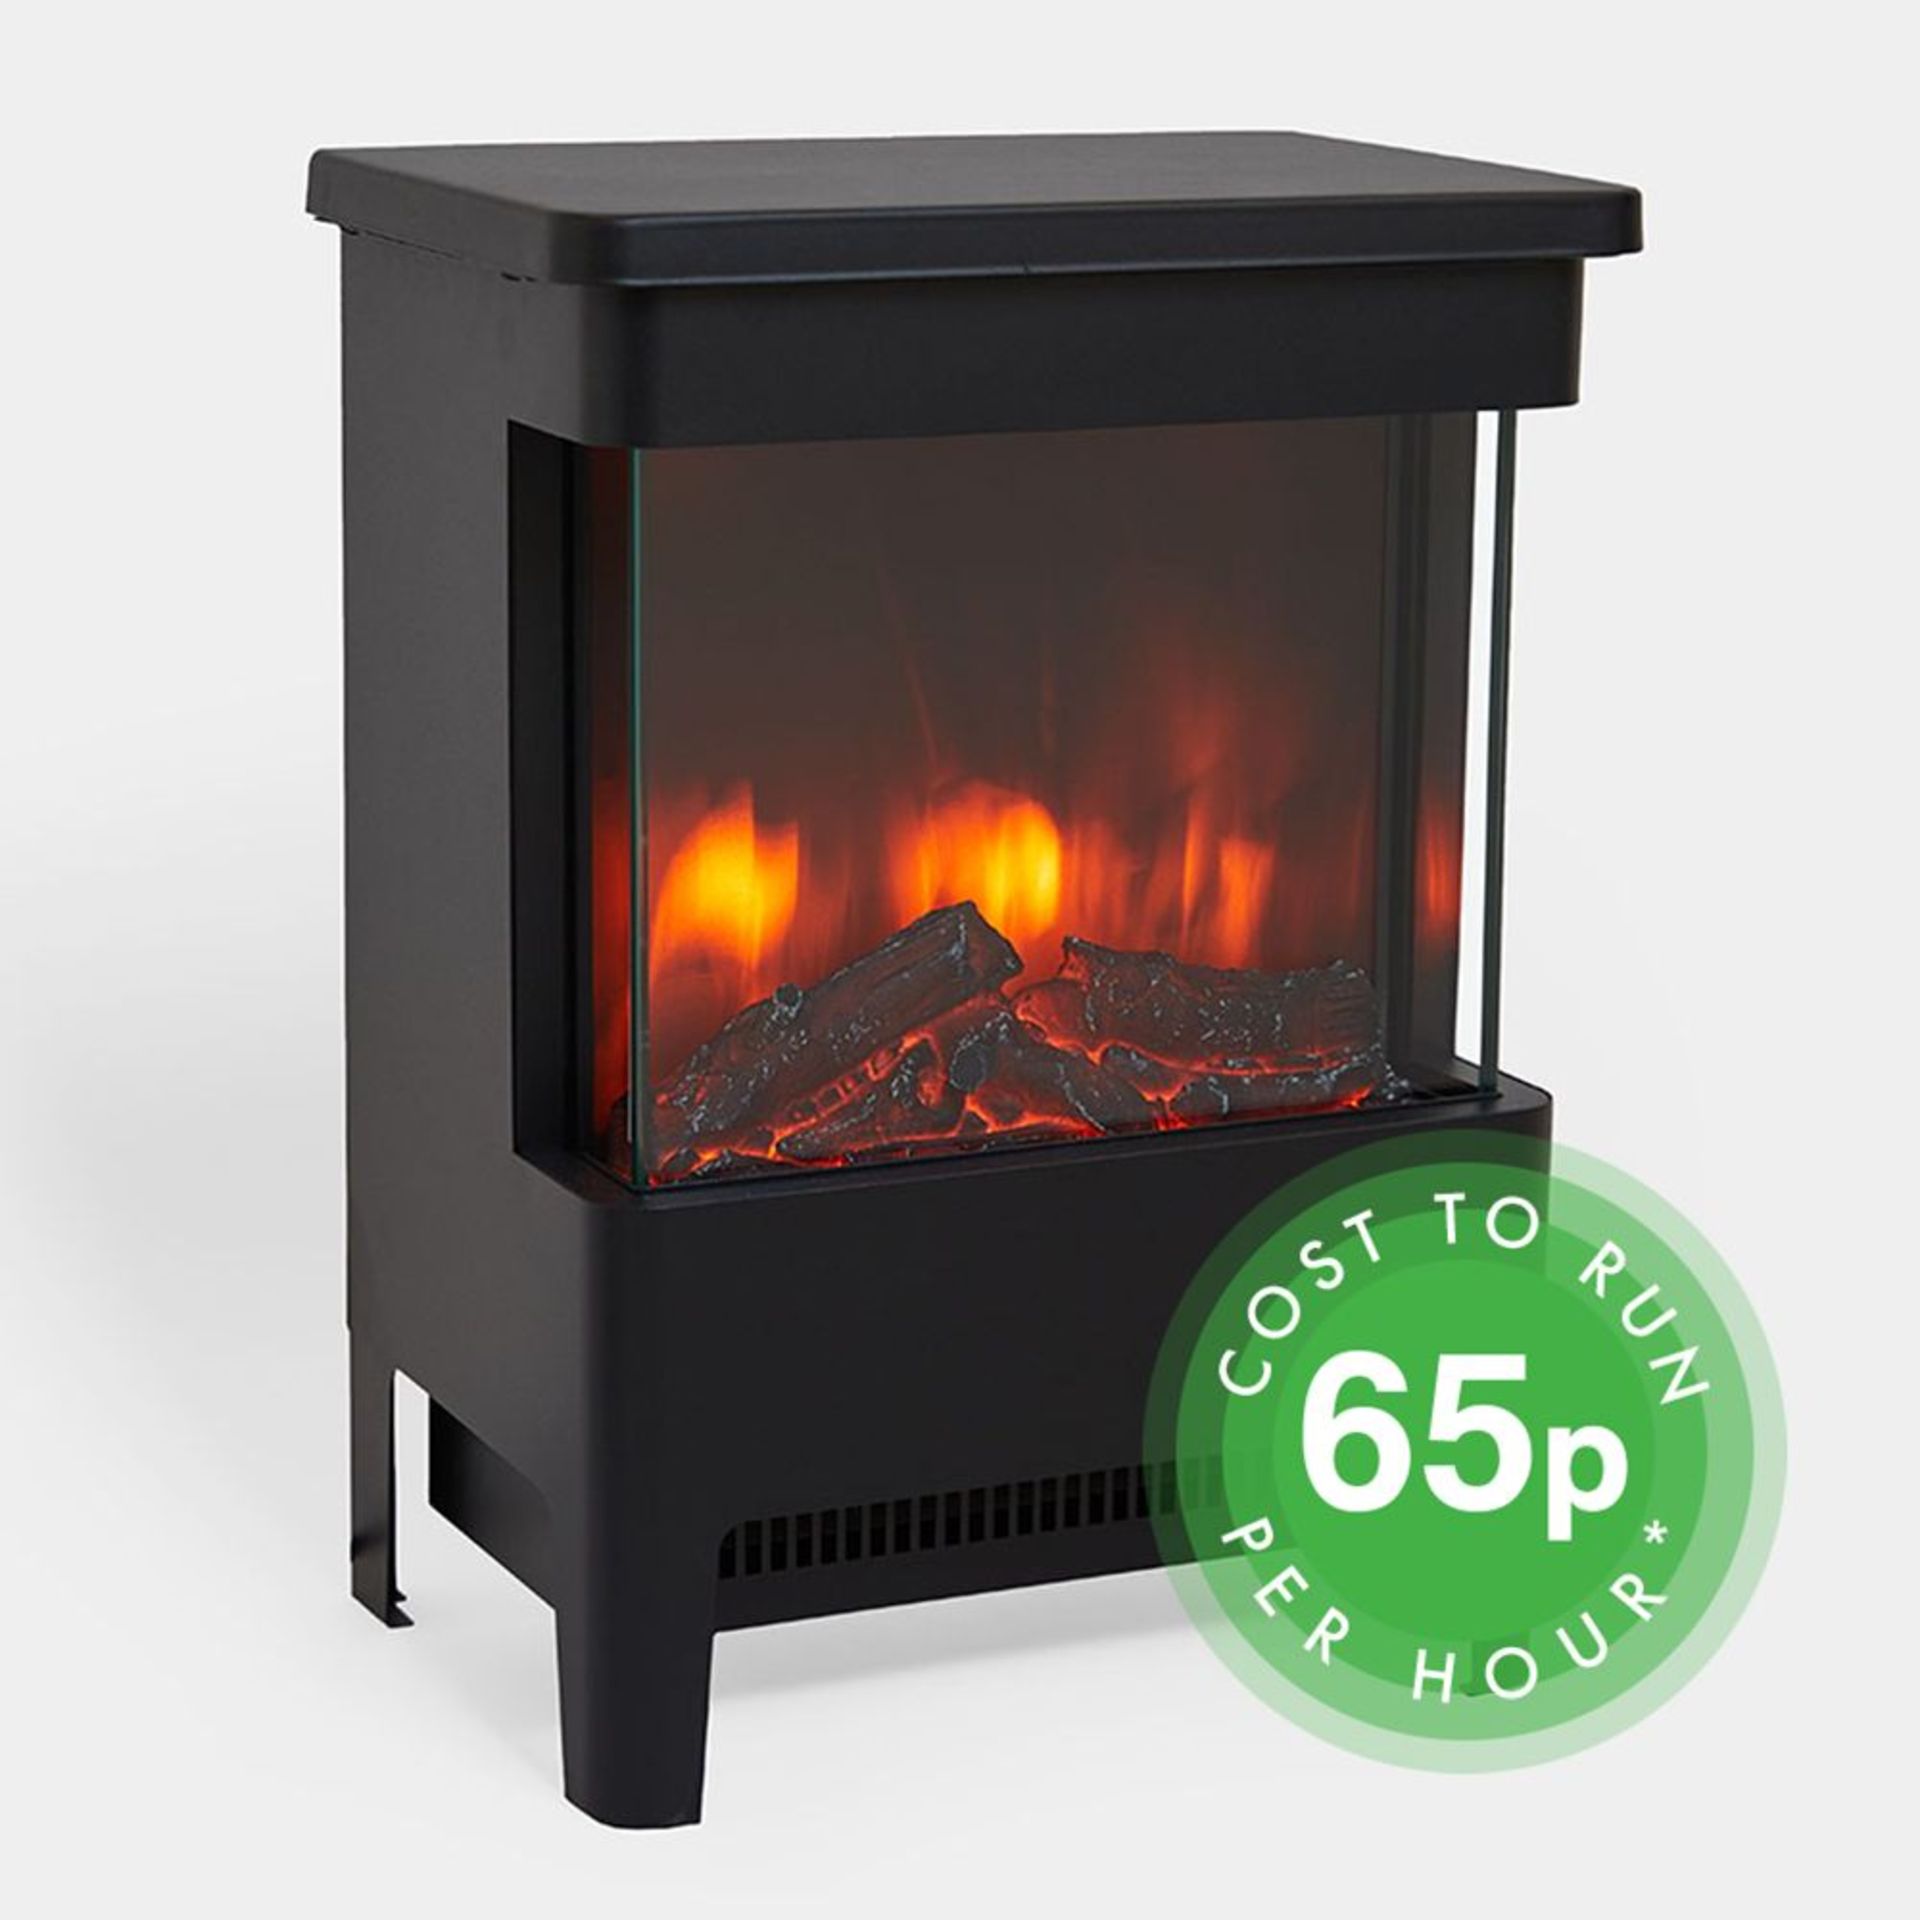 1900W Glass Front Stove Heater. Curl up in front of the fire and stay warm with 1900W power for fast